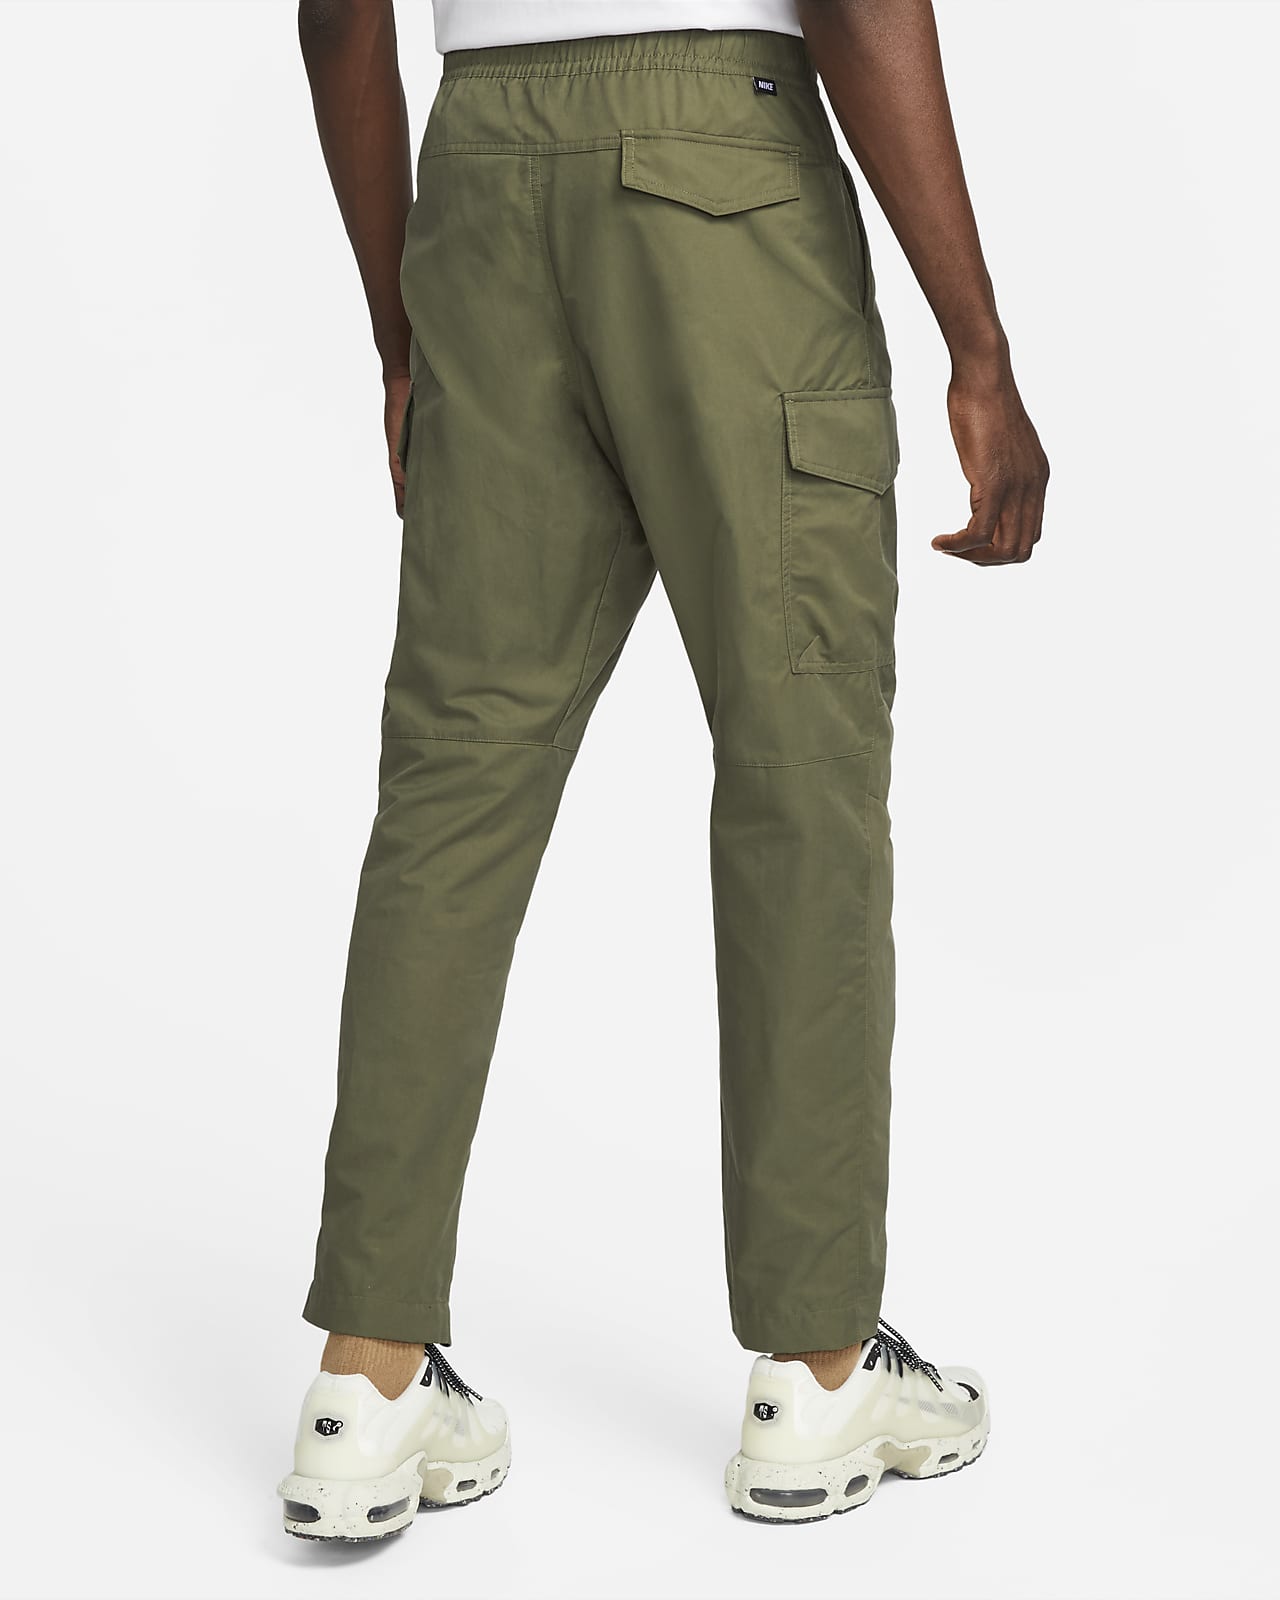 Top 85+ nike cargo trousers best - in.cdgdbentre